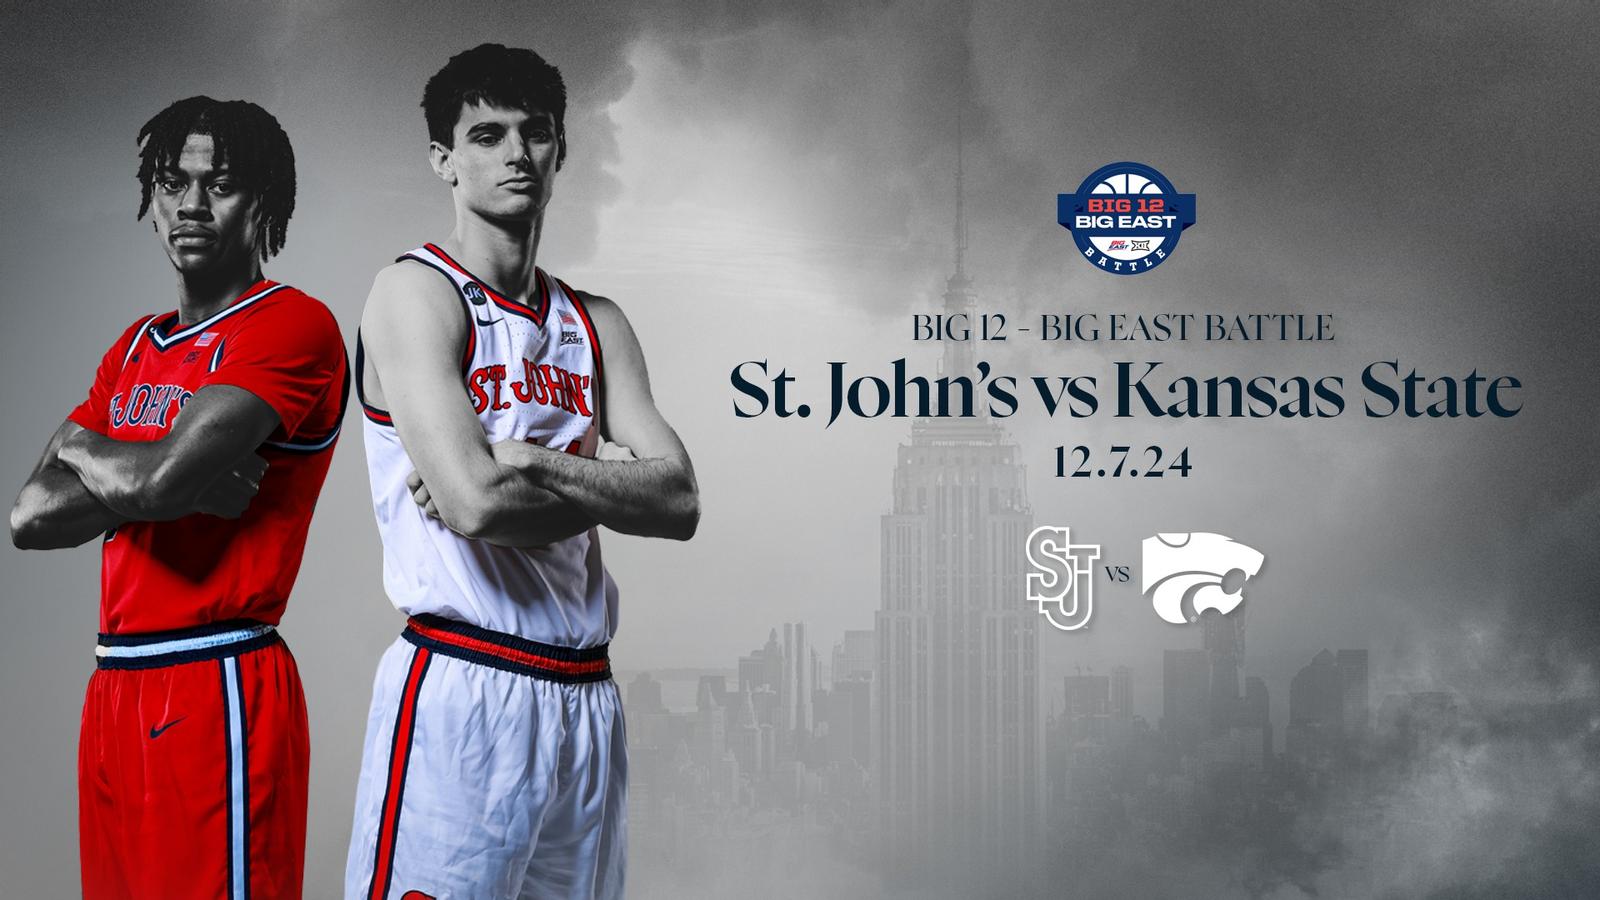 St. John’s to Face Kansas State in Big 12 – BIG EAST Battle